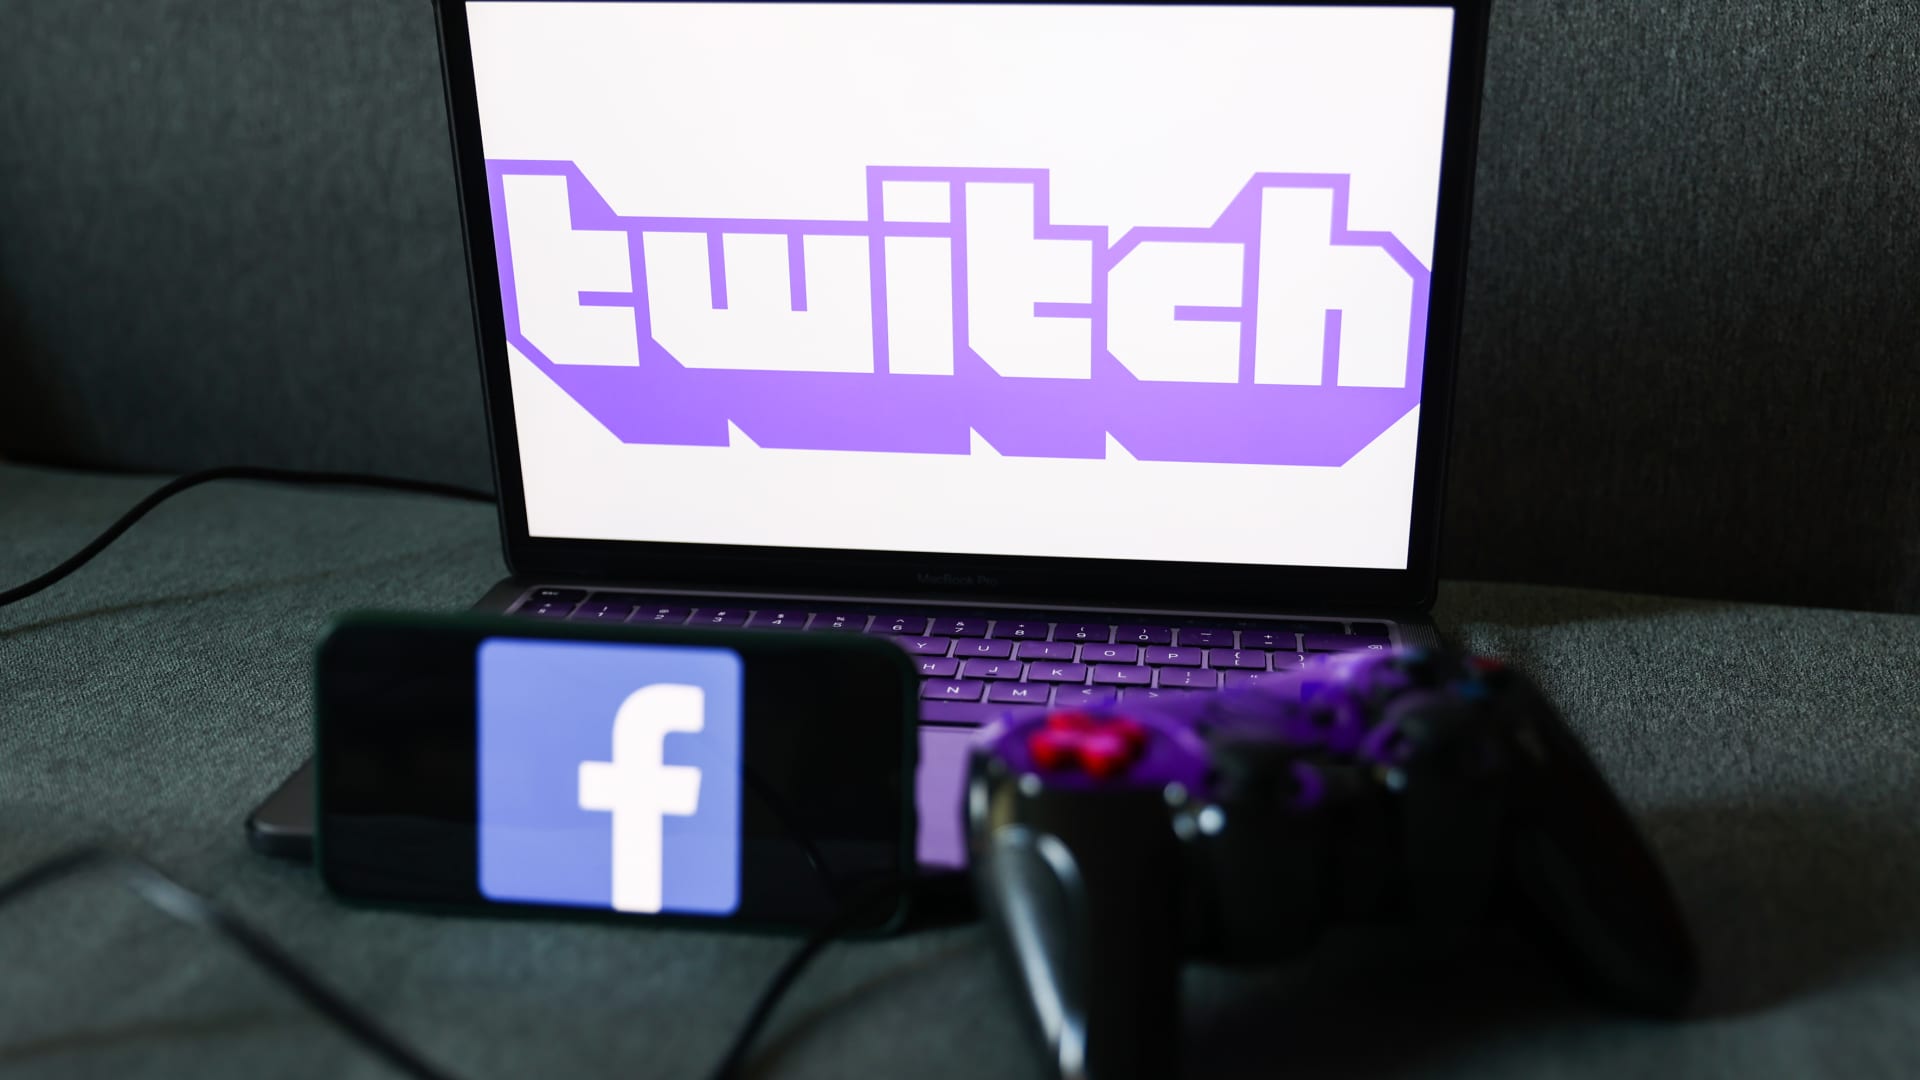 Facebook Gaming app, a rival to Amazon's Twitch, to shut down